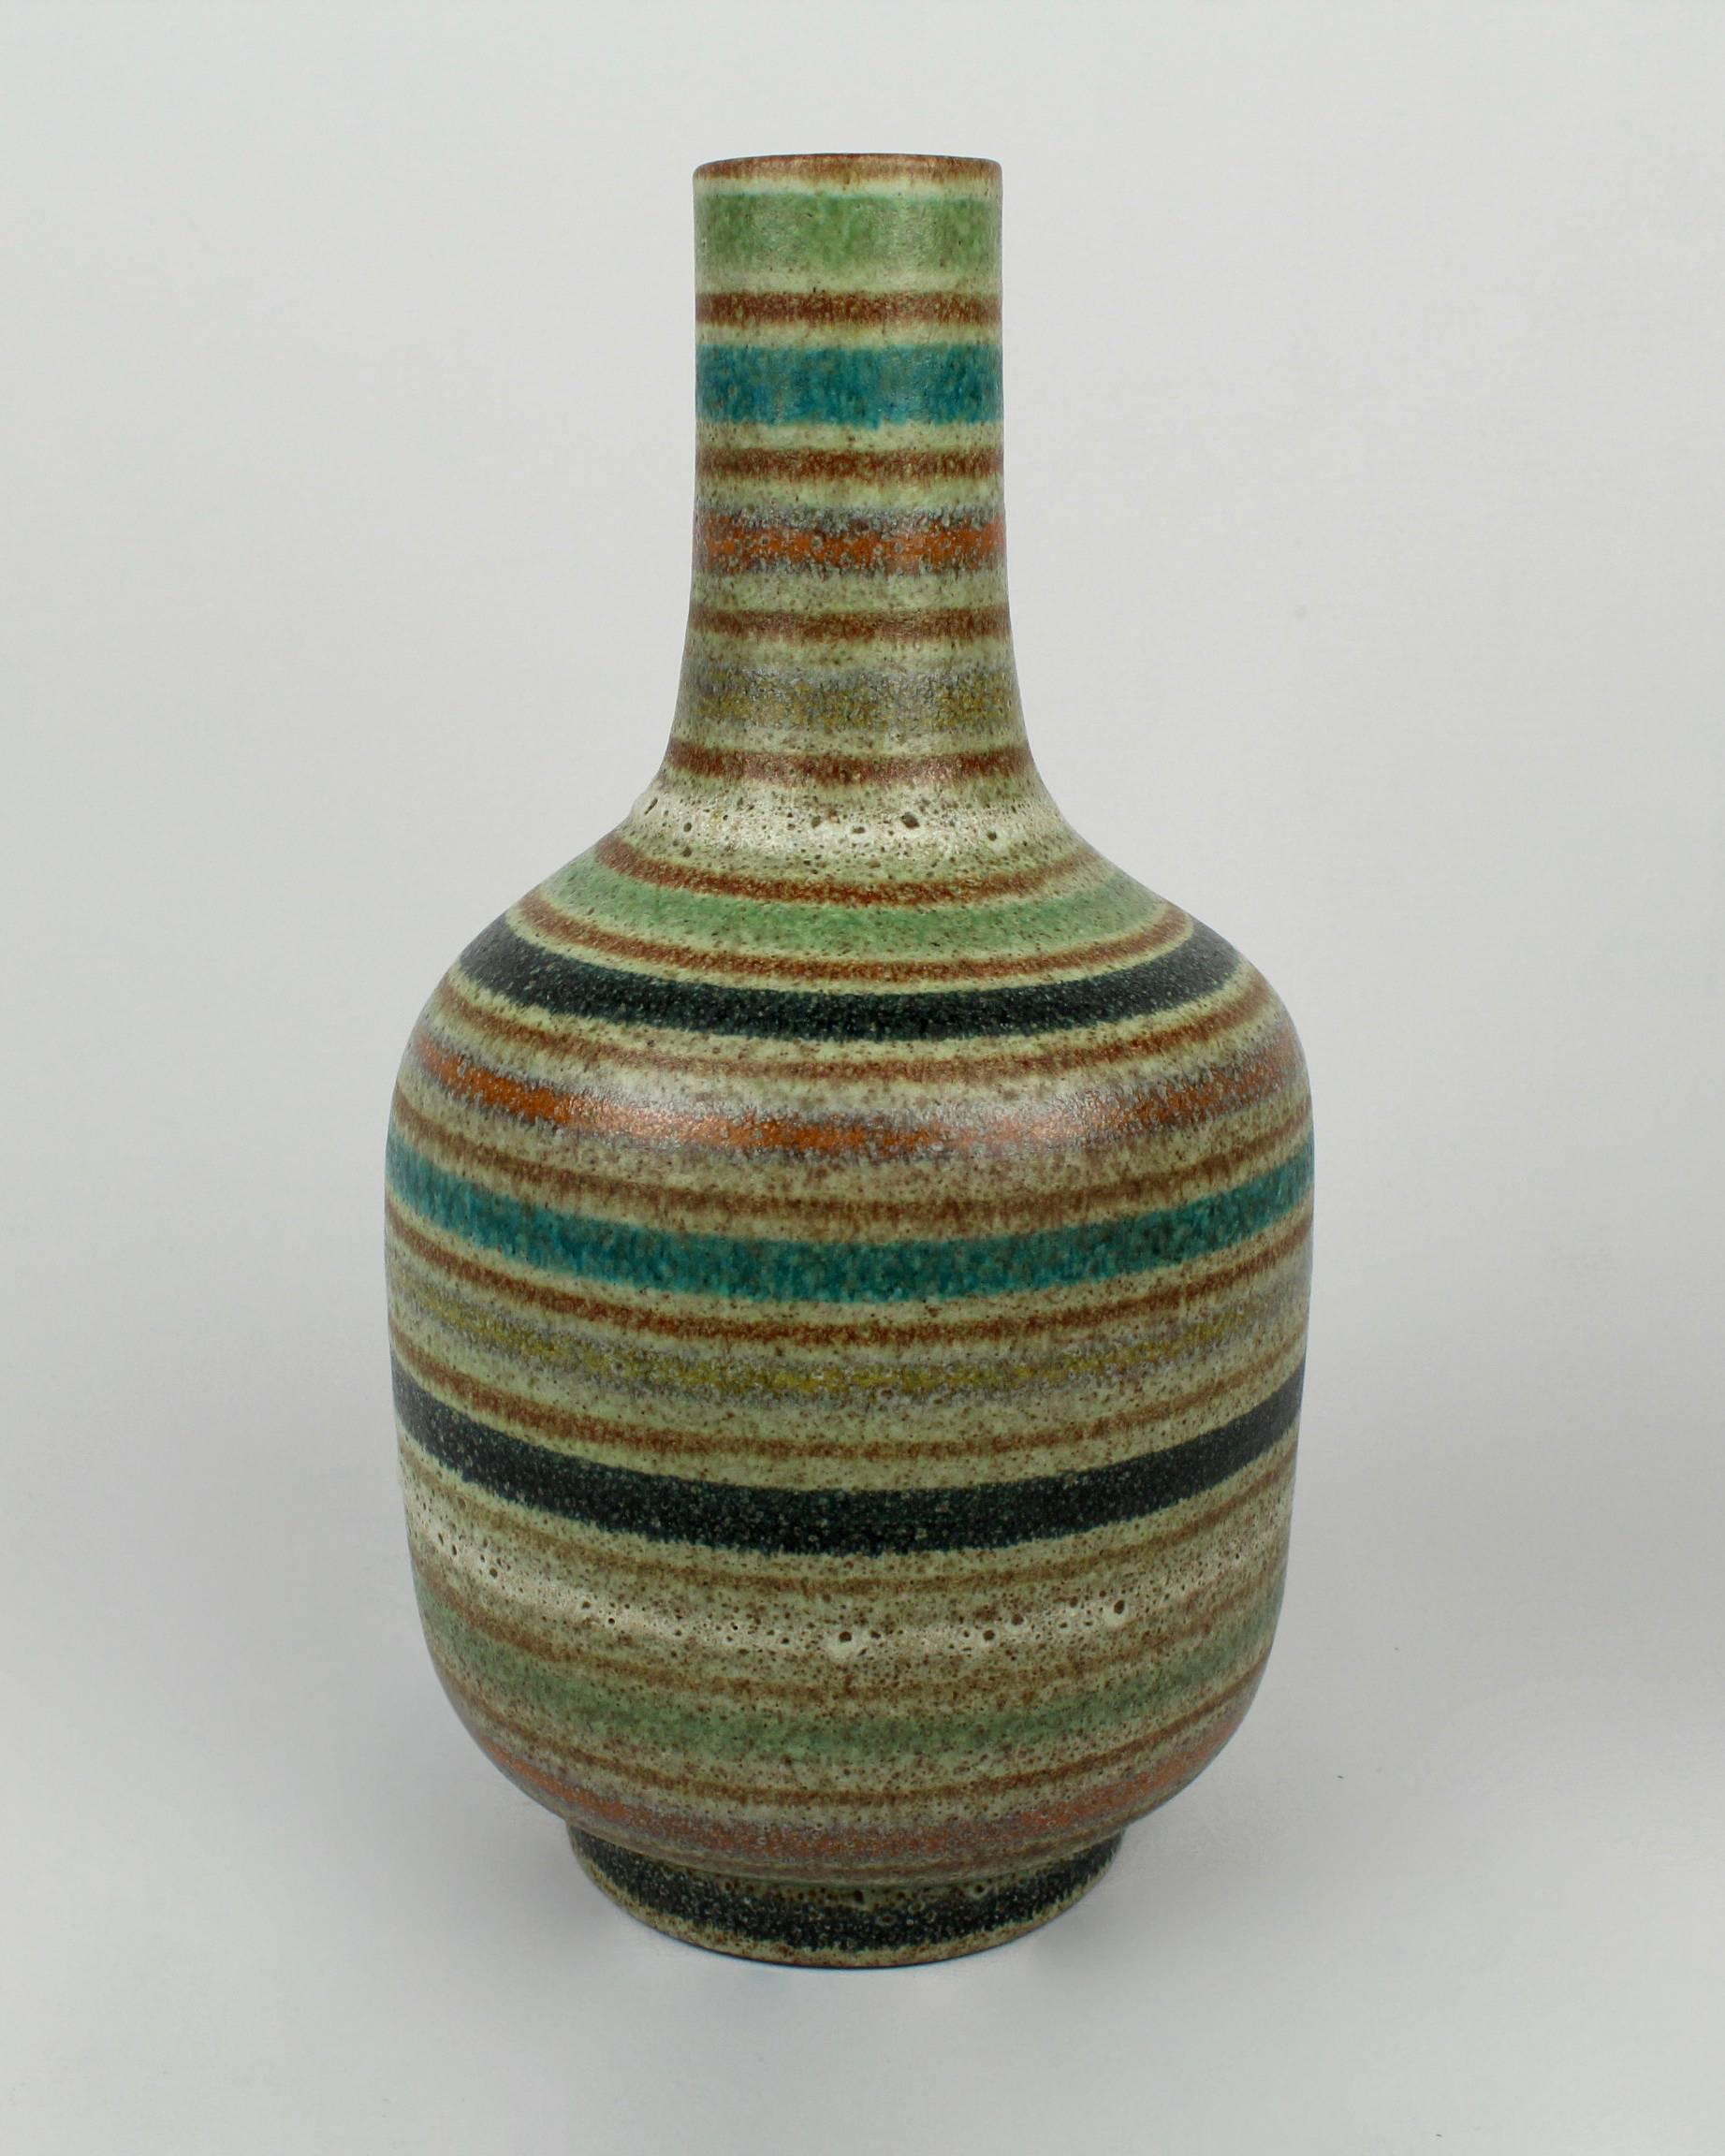 A fine and robustly glazed Mid-Century Modern Italian art pottery vase in the style of Gambone or Bistossi. The textured surface shows openings in the thick glaze and is decorated with alternating horizontal stripes. The base is marked with a script